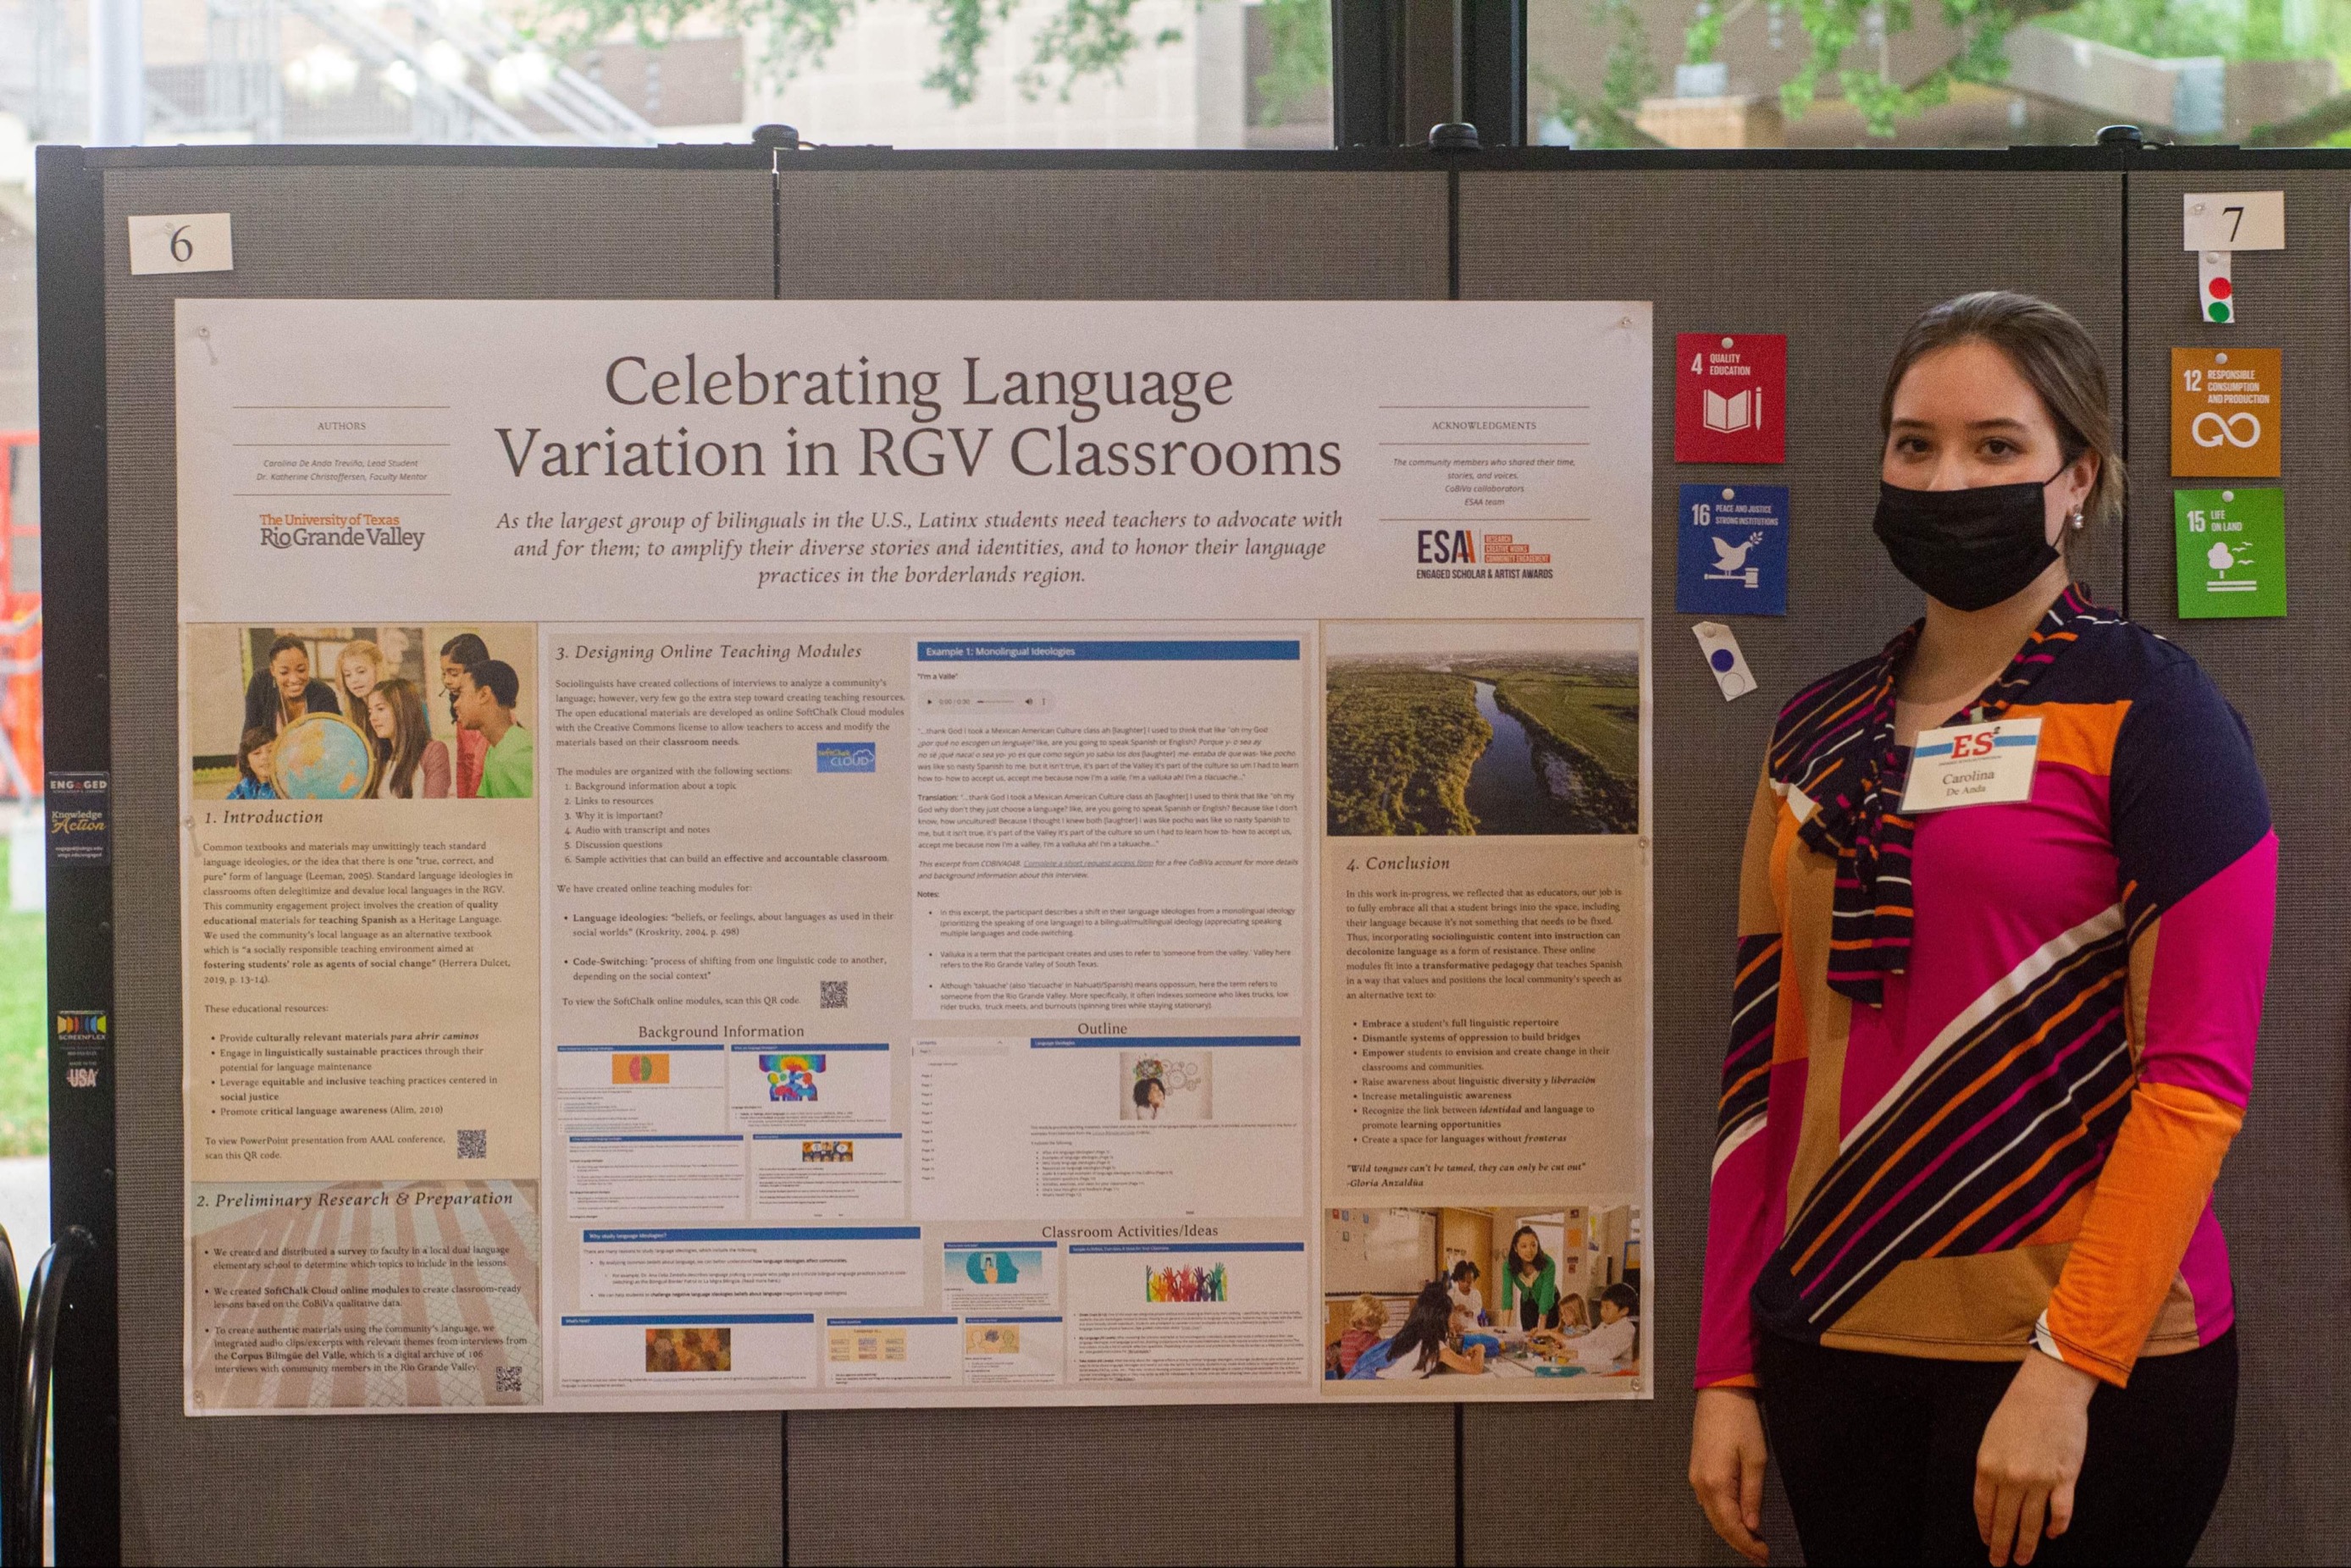 Carolina DeAnda earns Distinguished Scholar Award for Poster at Engaged Scholar Symposium post content graphic